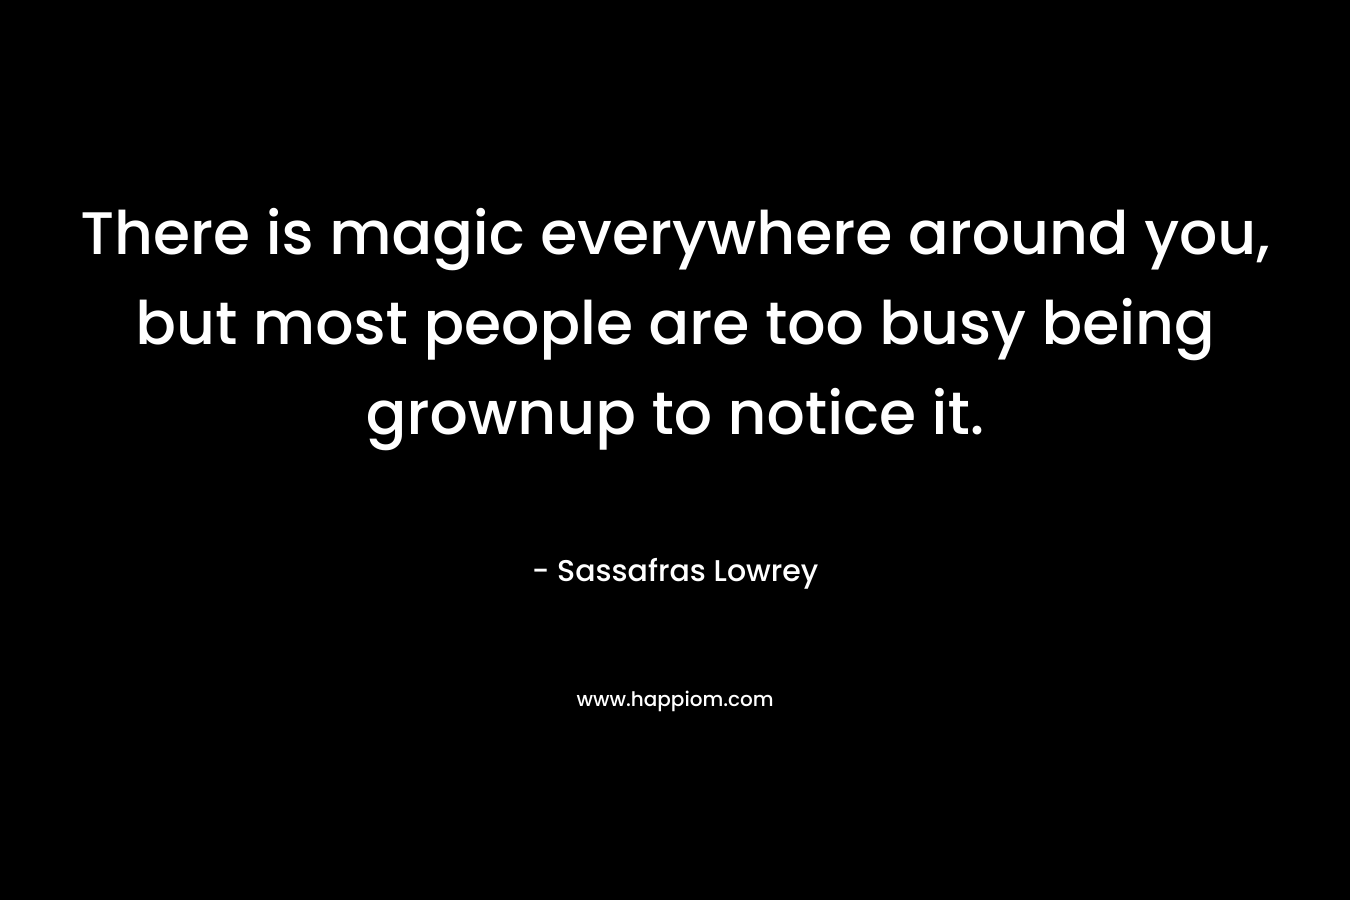 There is magic everywhere around you, but most people are too busy being grownup to notice it. – Sassafras Lowrey